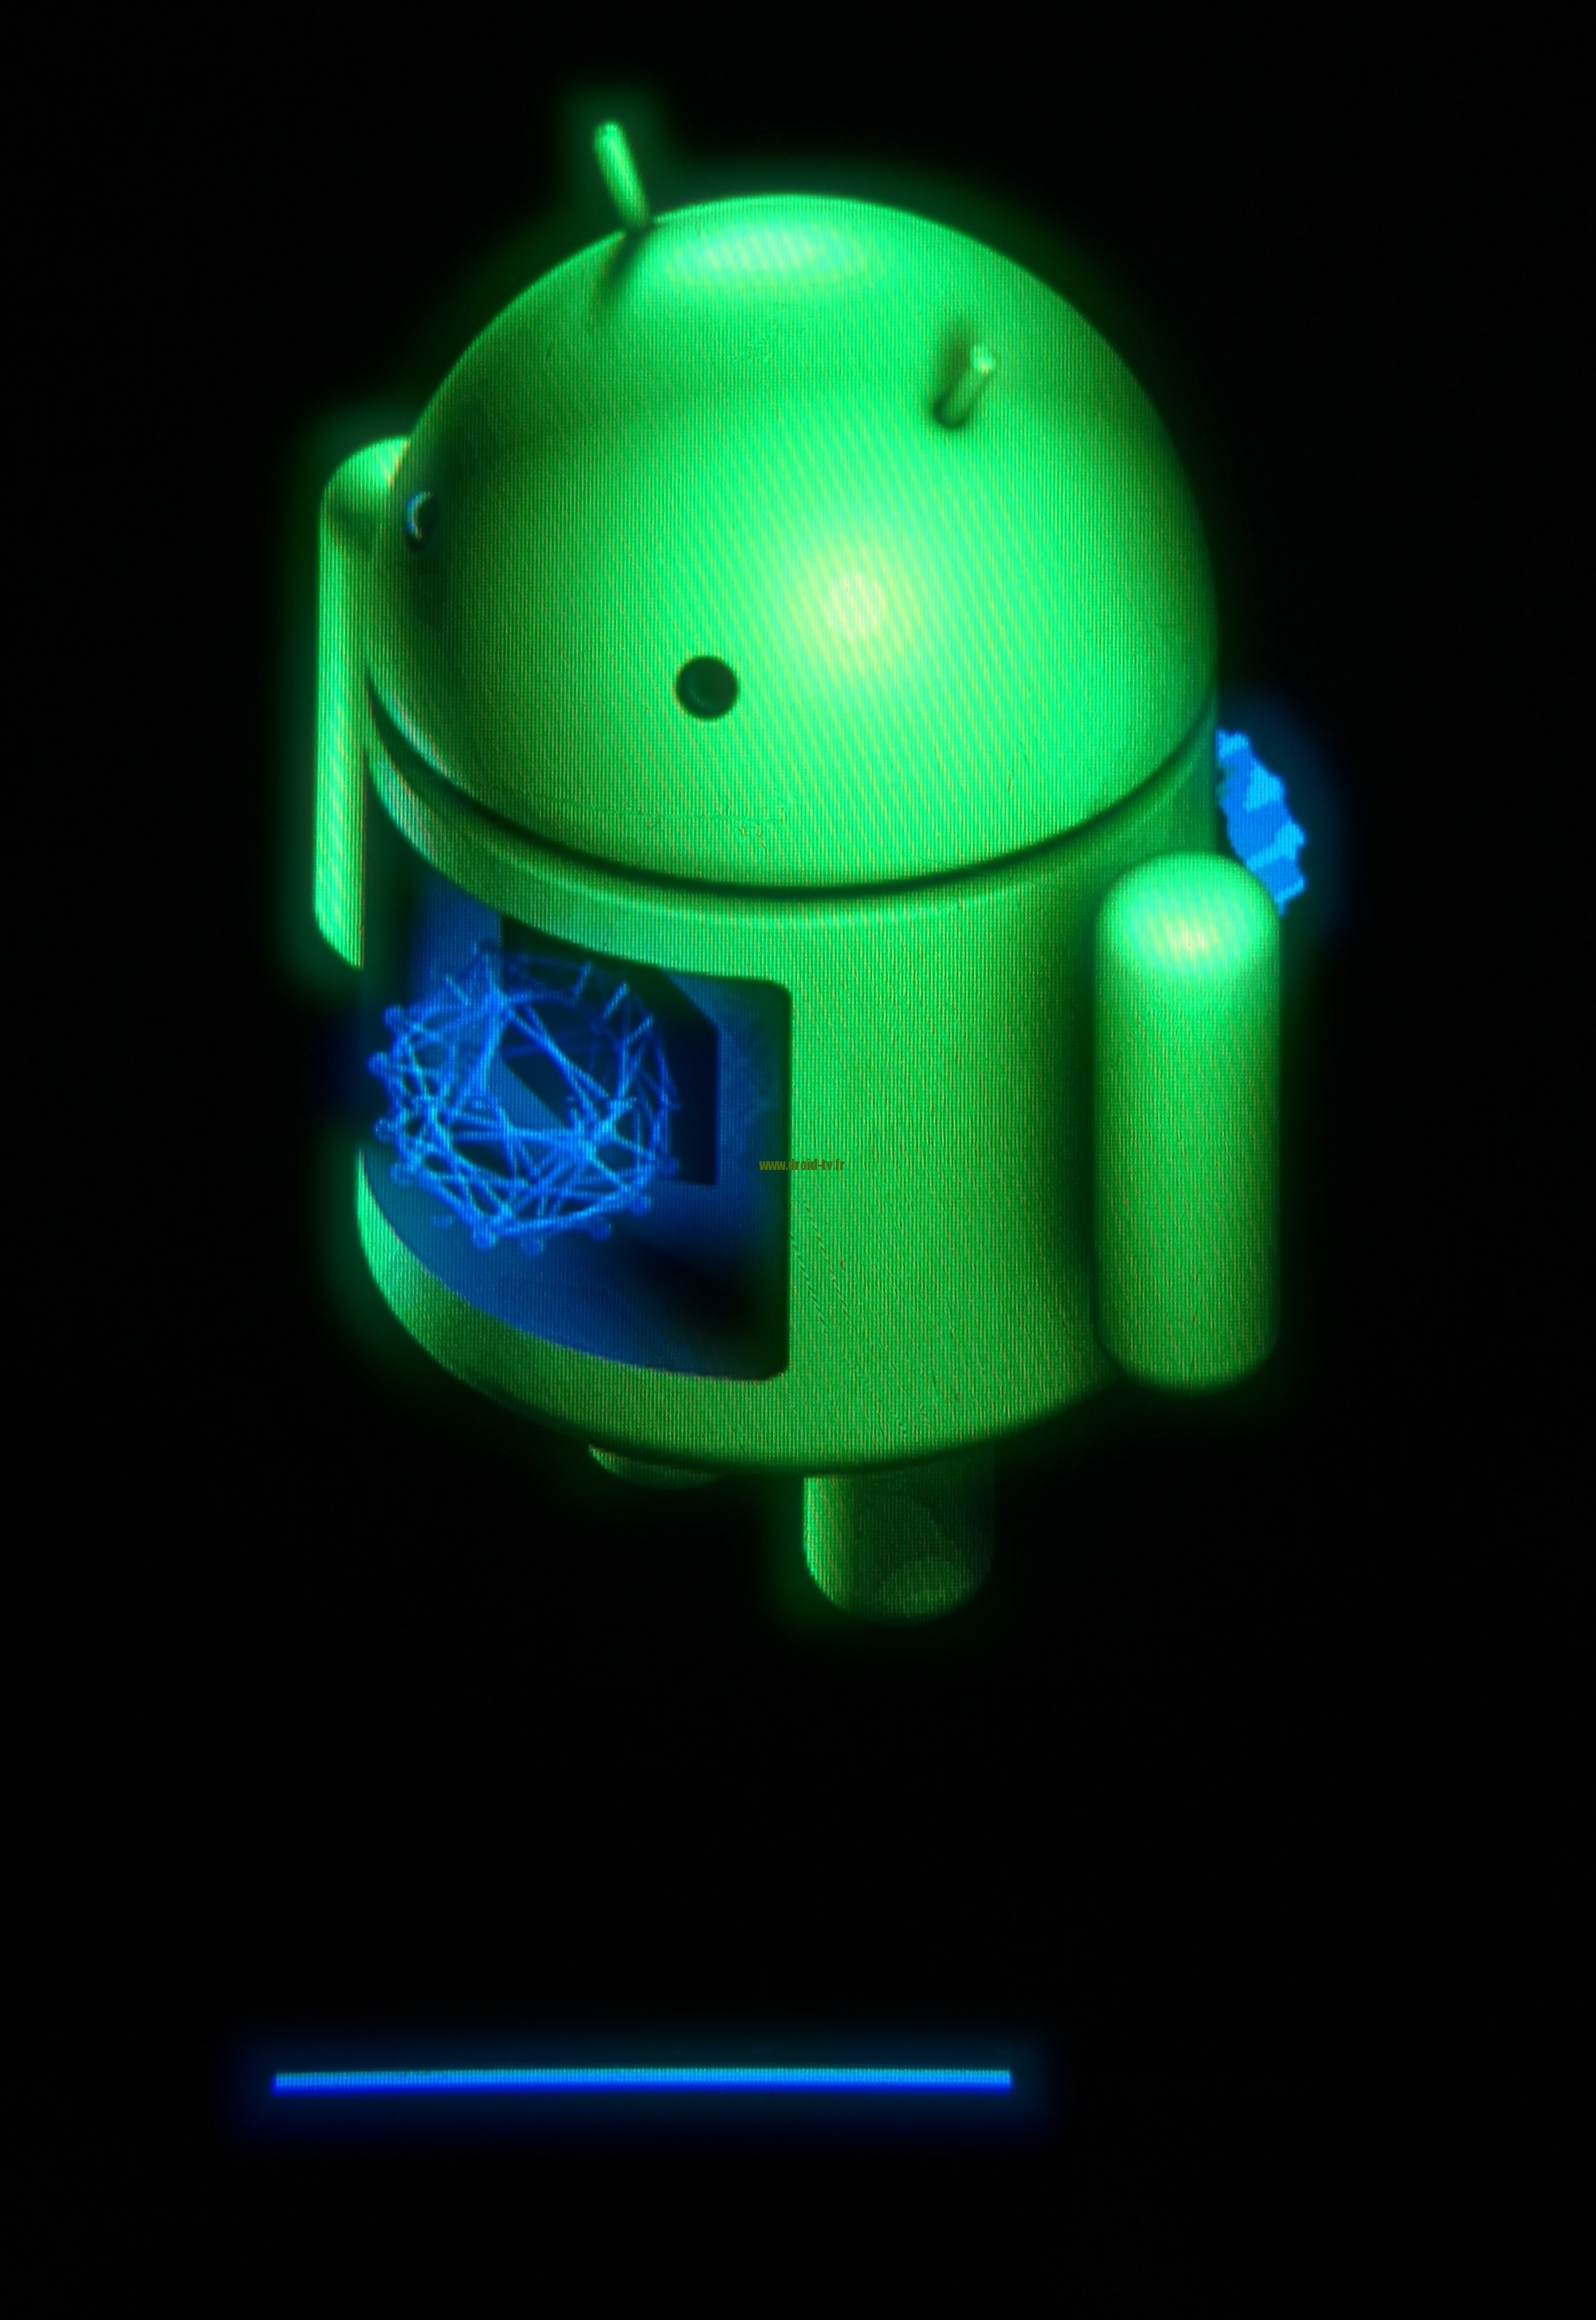 Mise a jour Android Droid-TV.fr